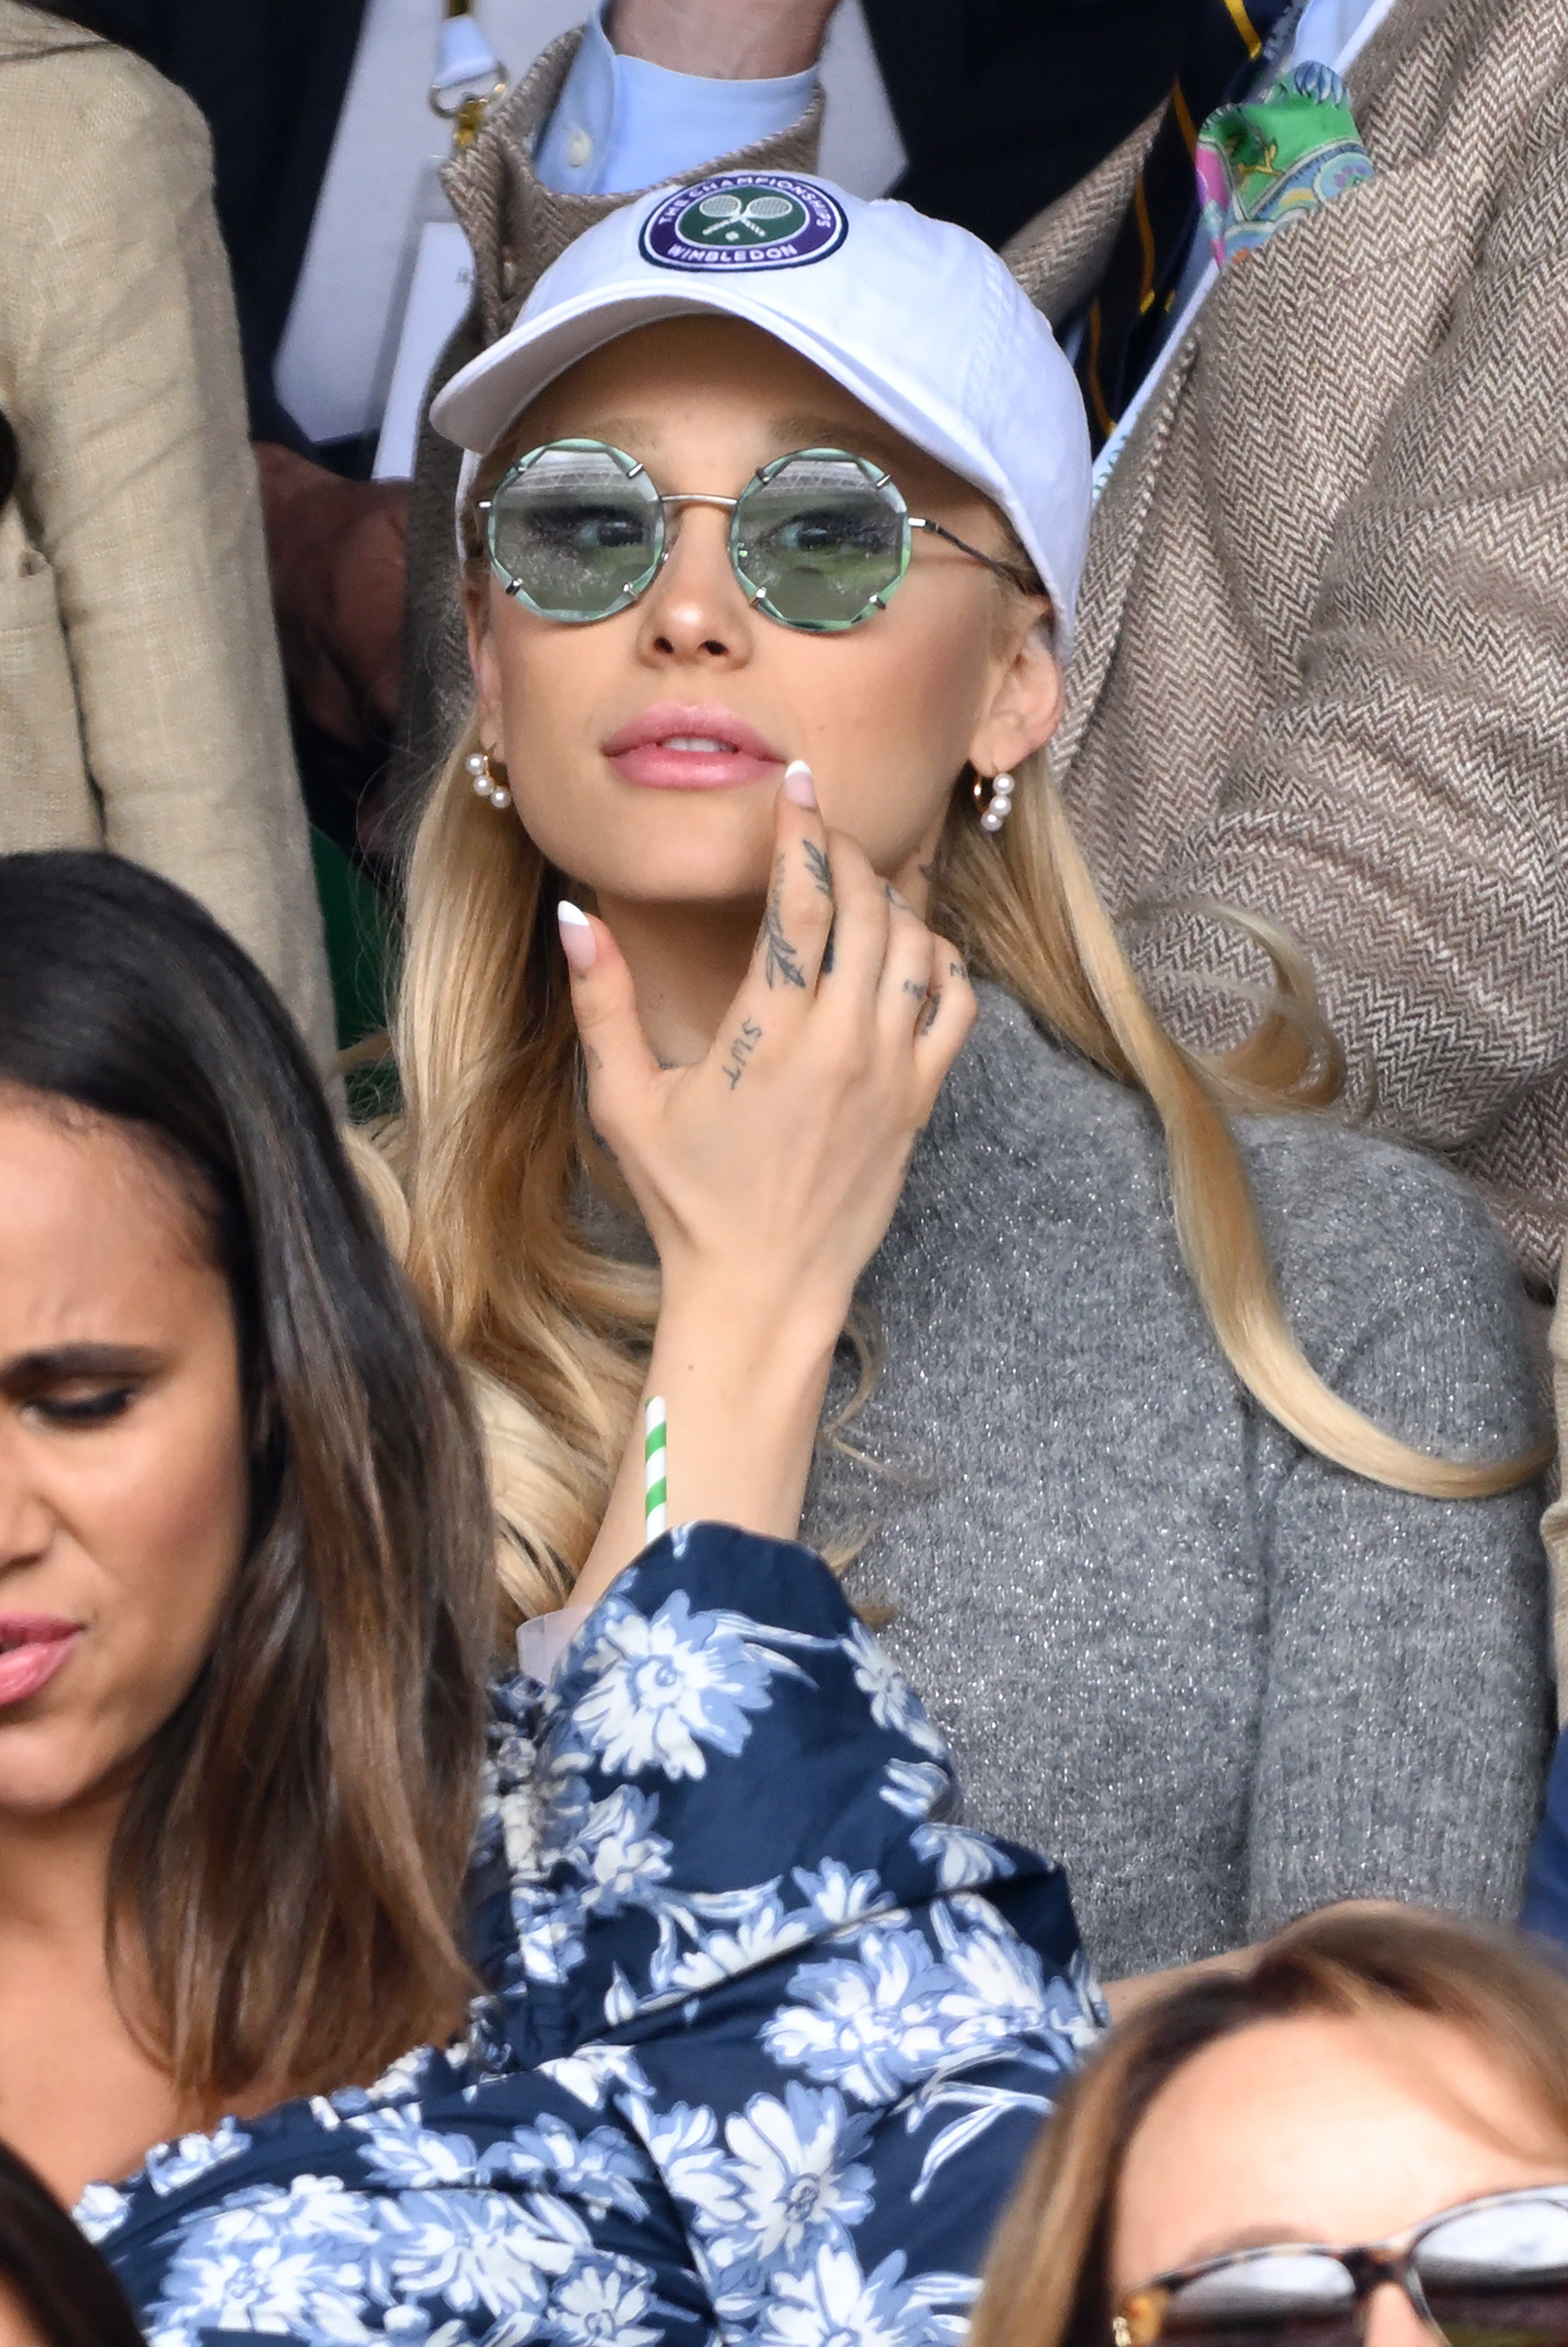 Close-up of Adriana sitting in an audience wearing a cap and sunglasses